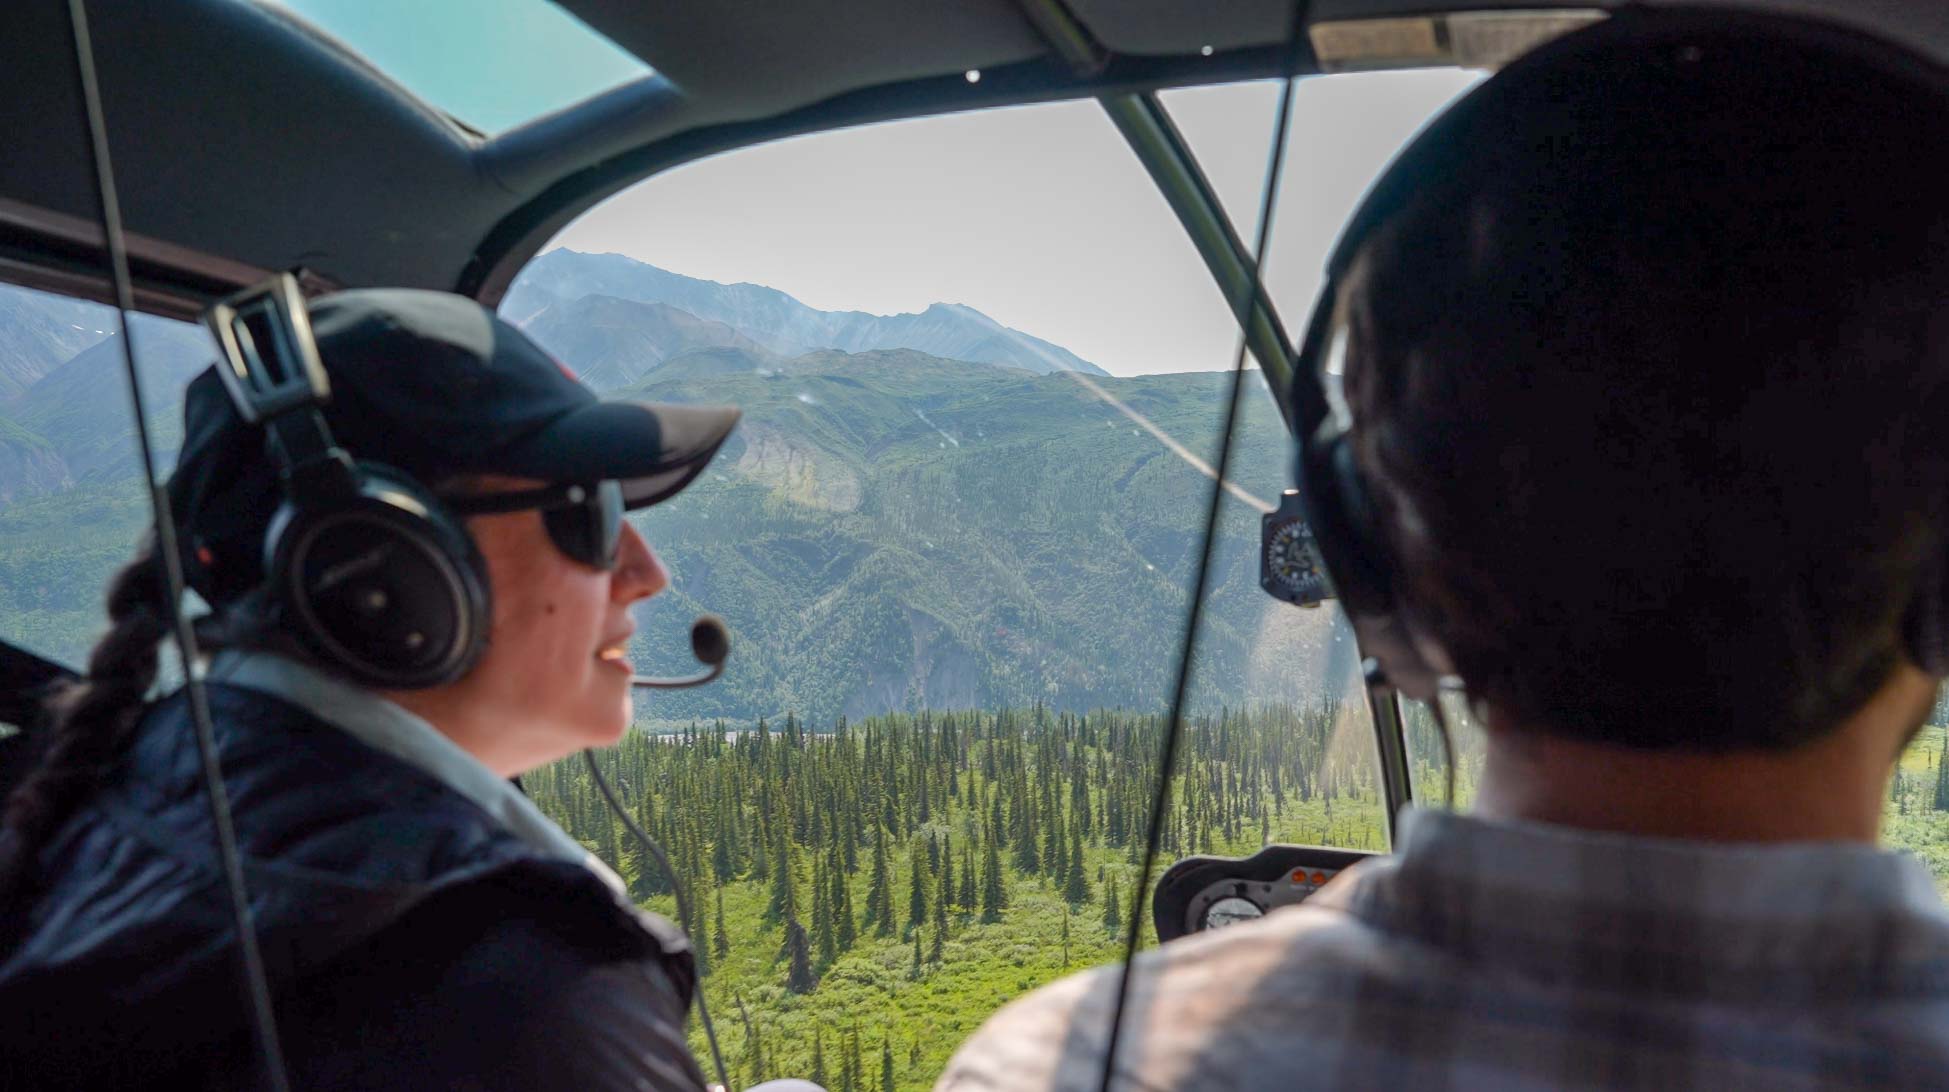 pilot and passenger look out the front window of a helicopter over green mountain landscape